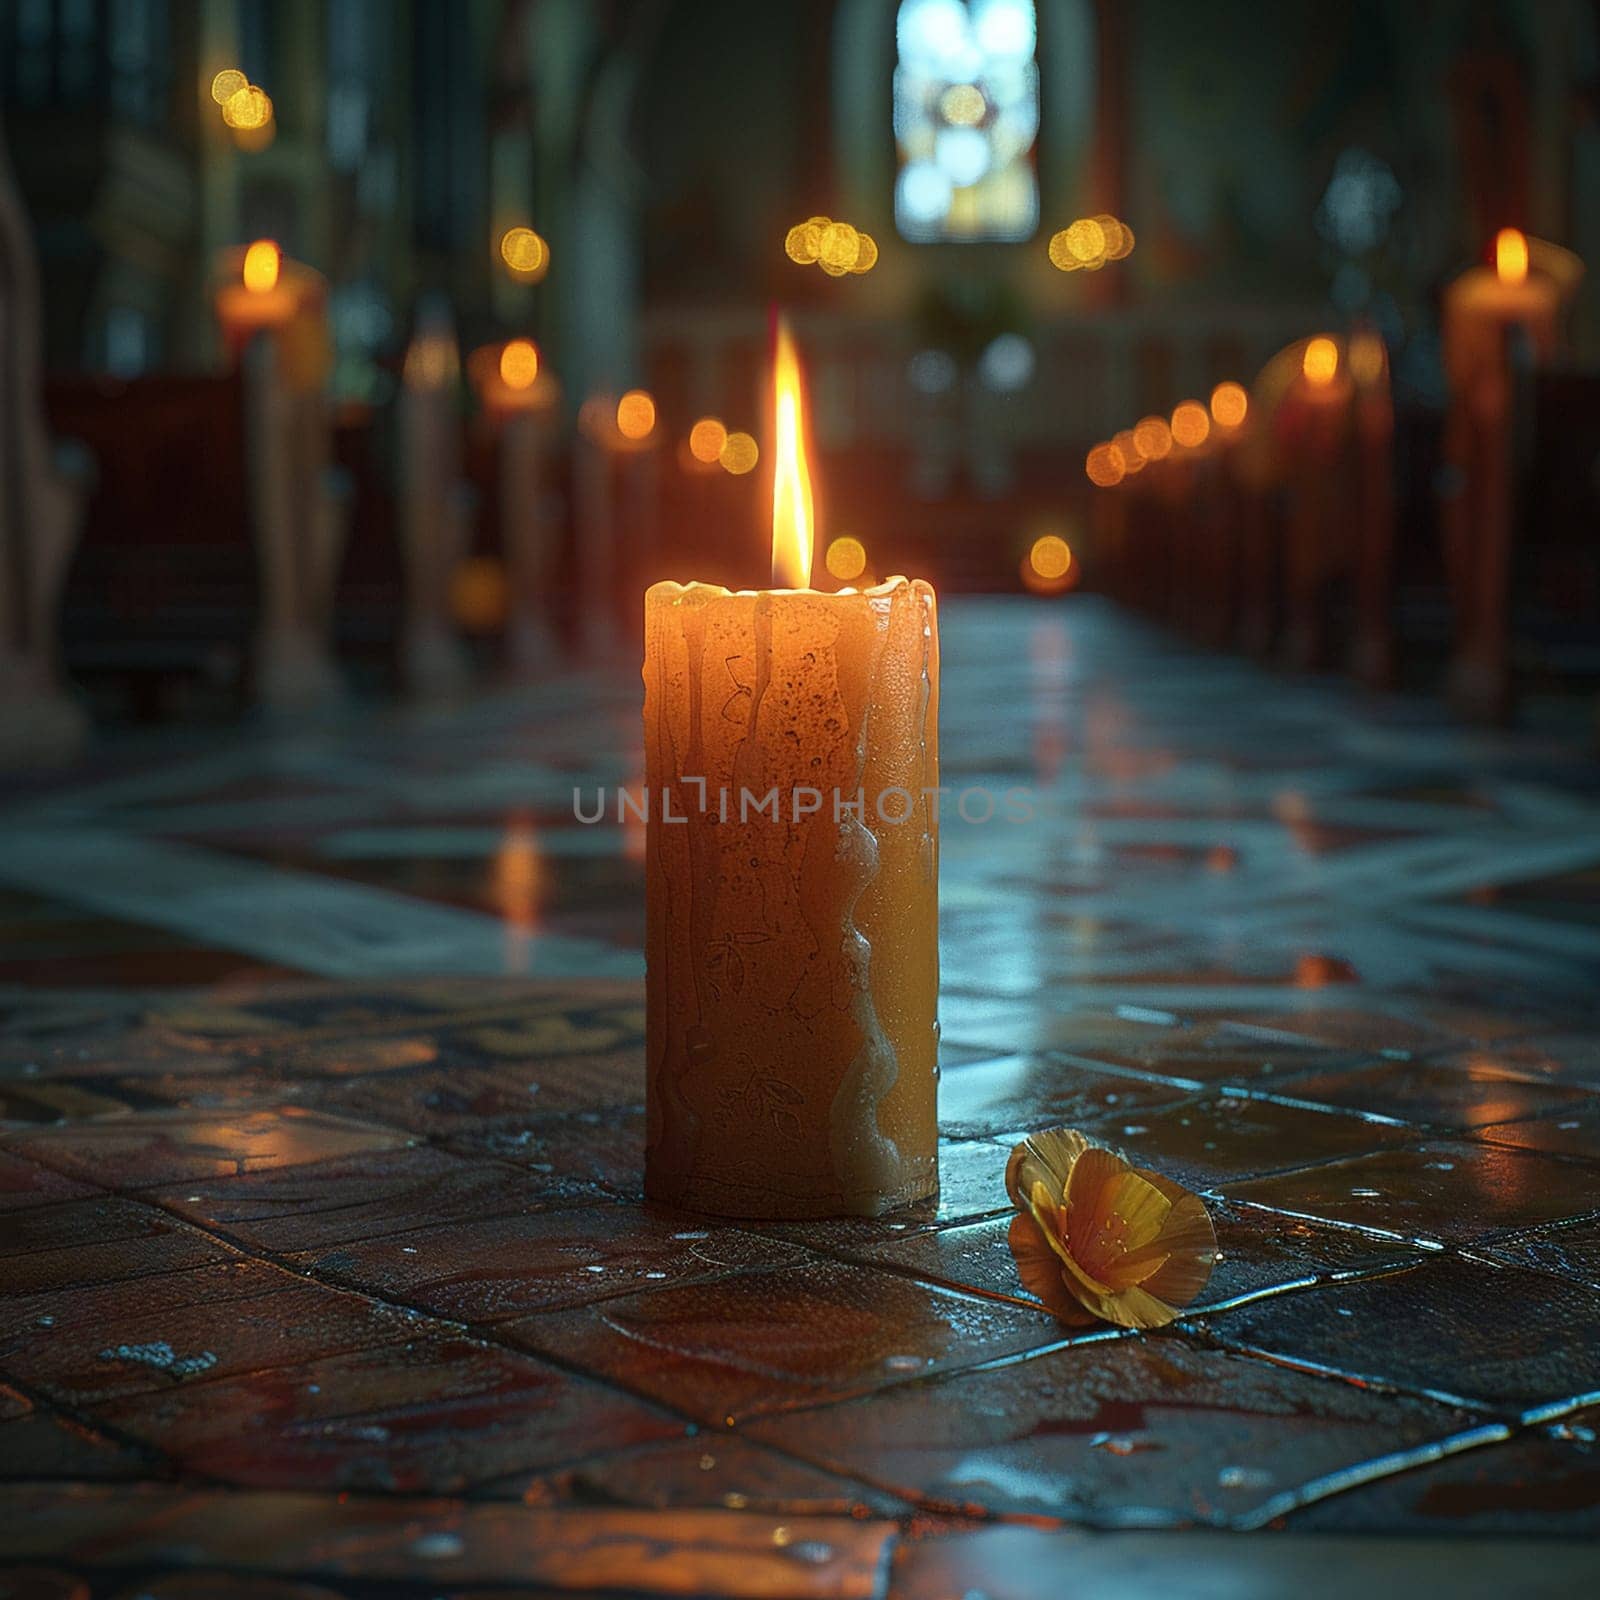 Solitary Vigil Candle Burning in an Empty Chapel, The flame blurs with hope, a flicker of faith in the quietude.